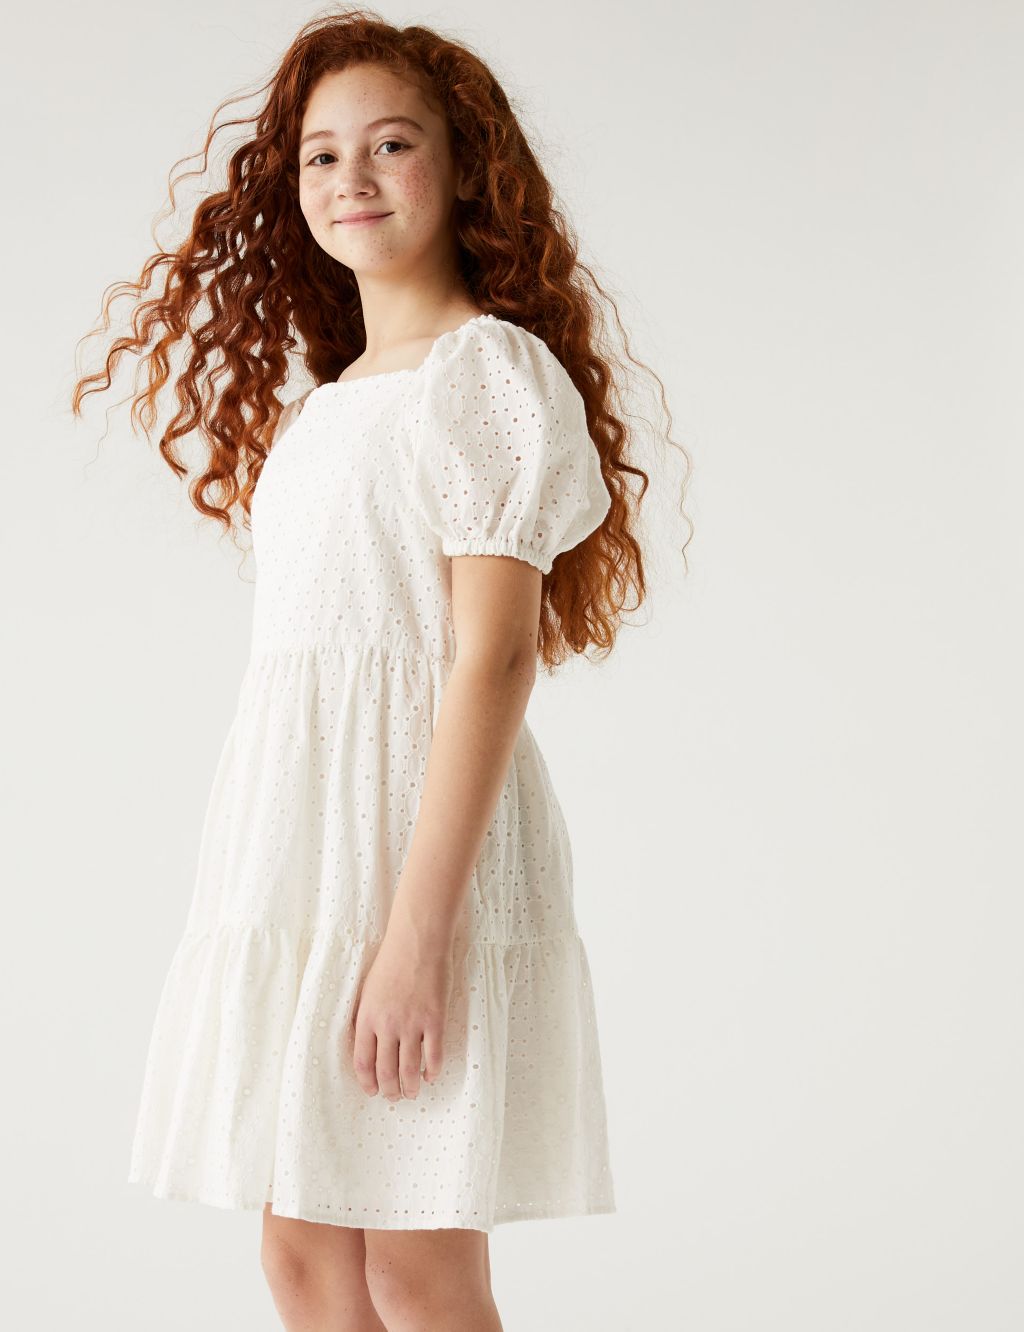 Pure Cotton Tiered Dress (6-16 Yrs)